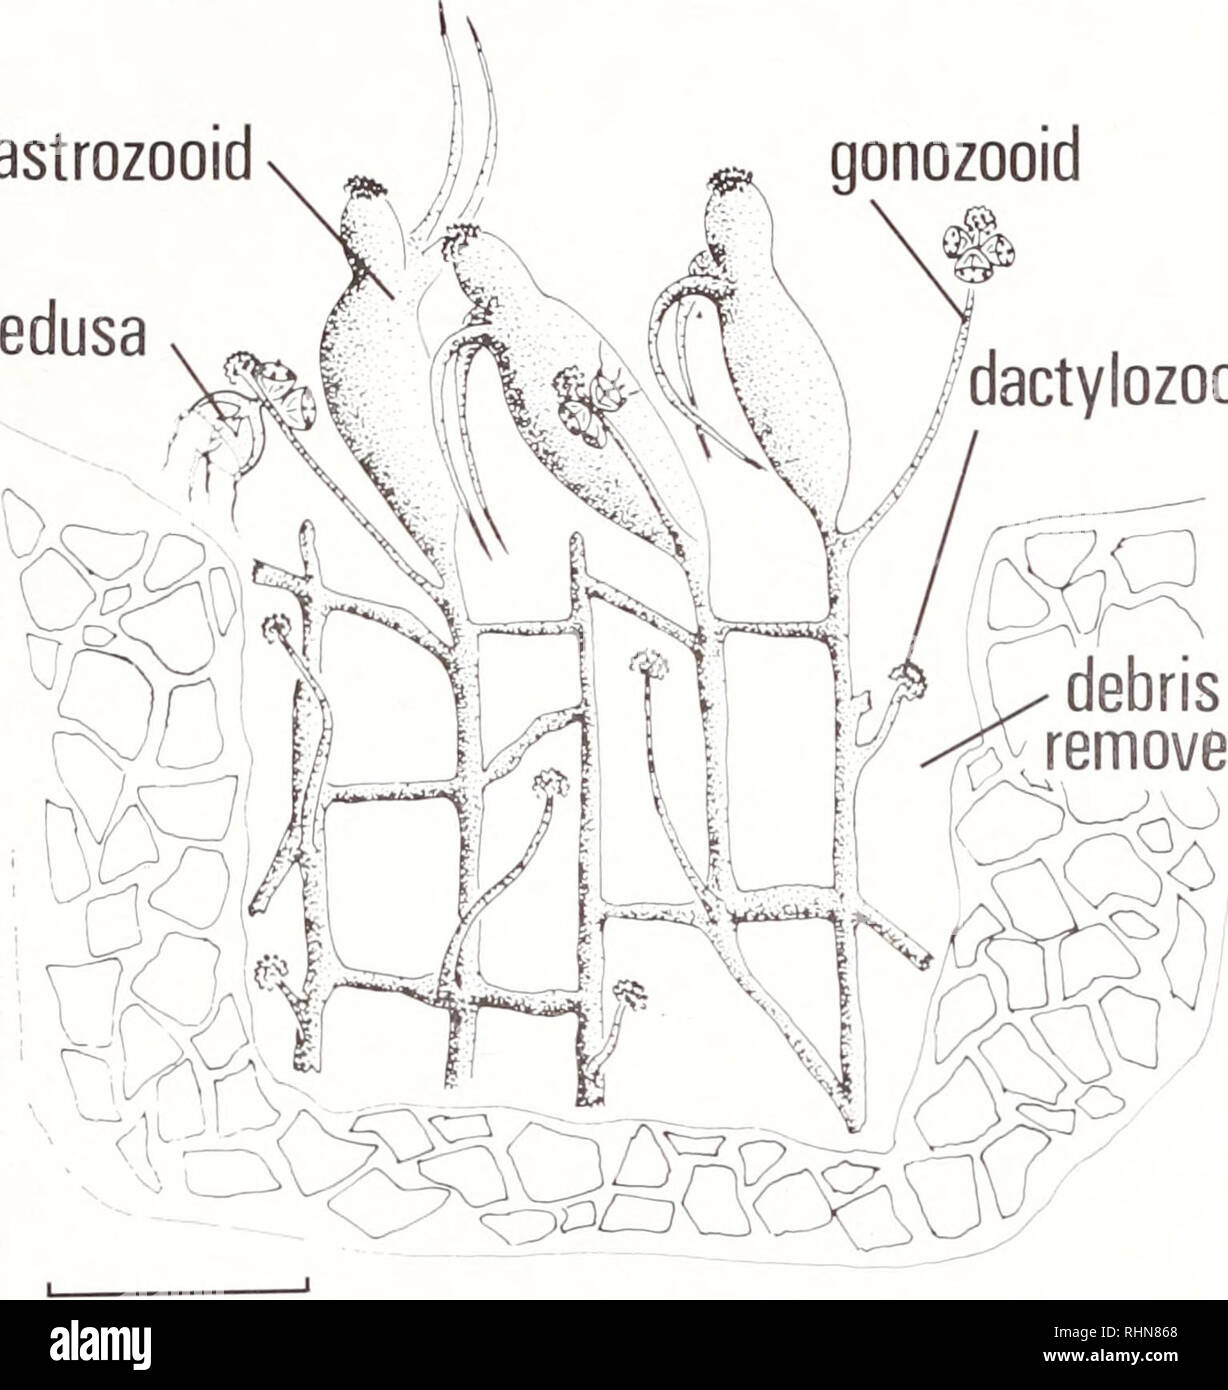 . The Biological bulletin. Biology; Zoology; Biology; Marine Biology. stolons gastrozooid worm tube gonozooid A. medusa dactylozooid. debris removed 1m.m. FIGURE 1. (A) Diagram of part of a colony of P. flaricirrata with the host worm re- moved, (B) appearance of the colony with the worm present. ' inly the proximal portions of most of the brachioles of the worm are shown. the &quot;neck&quot; of the hypostome. The apex of the hypostome carries a nematocyst pad (cnidothylacie) as do the terminal knobs of dactylozooids and gonozooids. Gono- zooids arise close to the bases of the gastrozooids (u Stock Photo